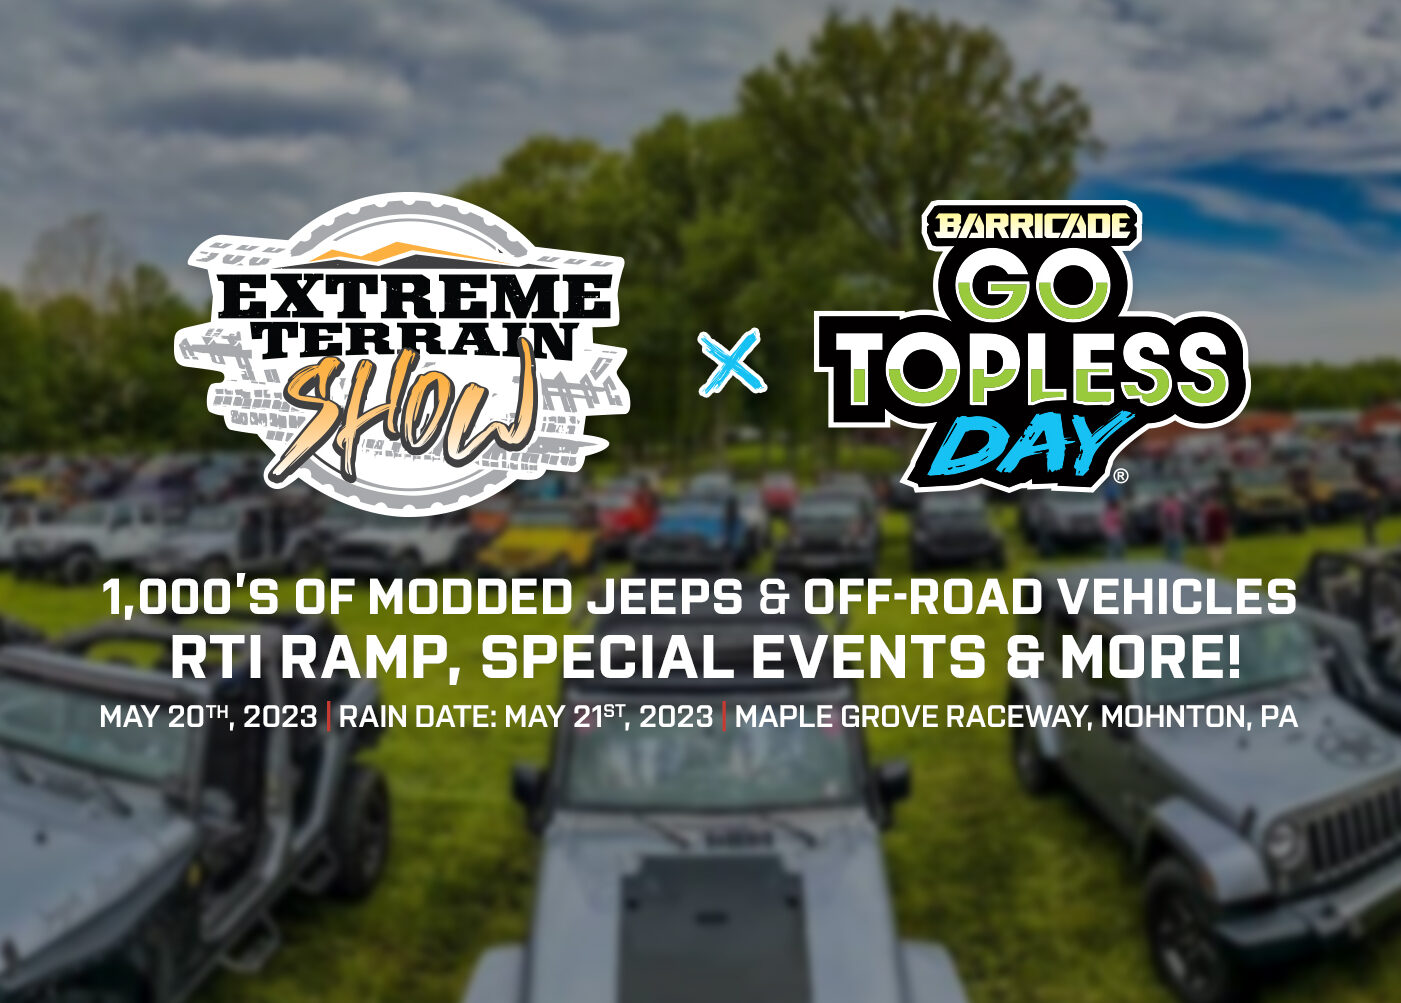 Barricade Go Topless Day® set for May 20th, 2023